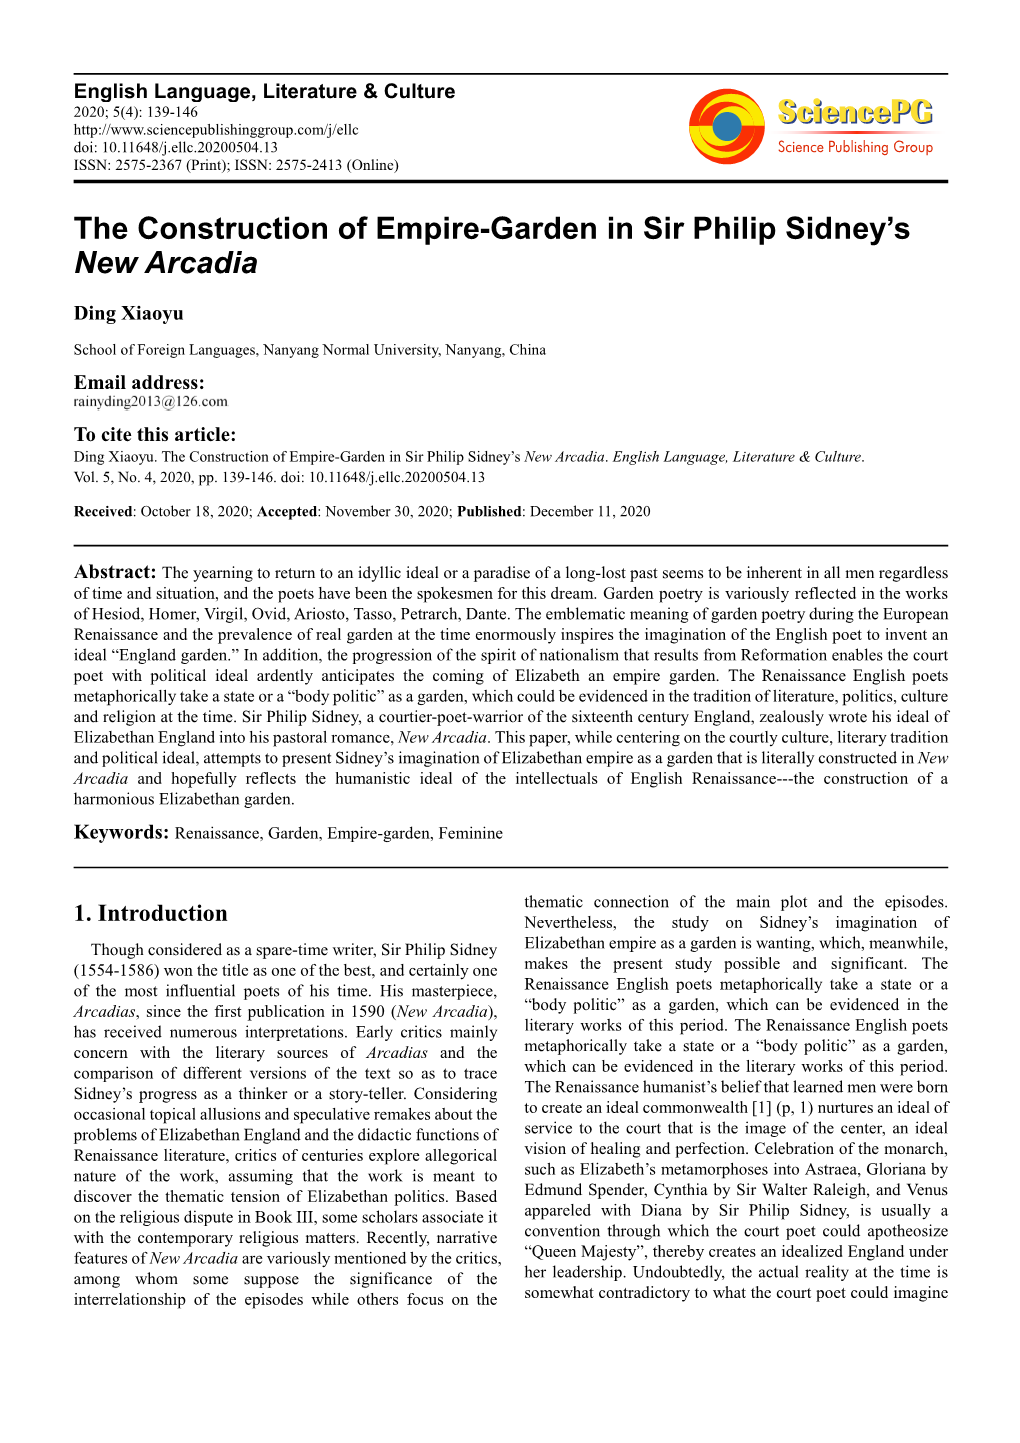 The Construction of Empire-Garden in Sir Philip Sidney's New Arcadia